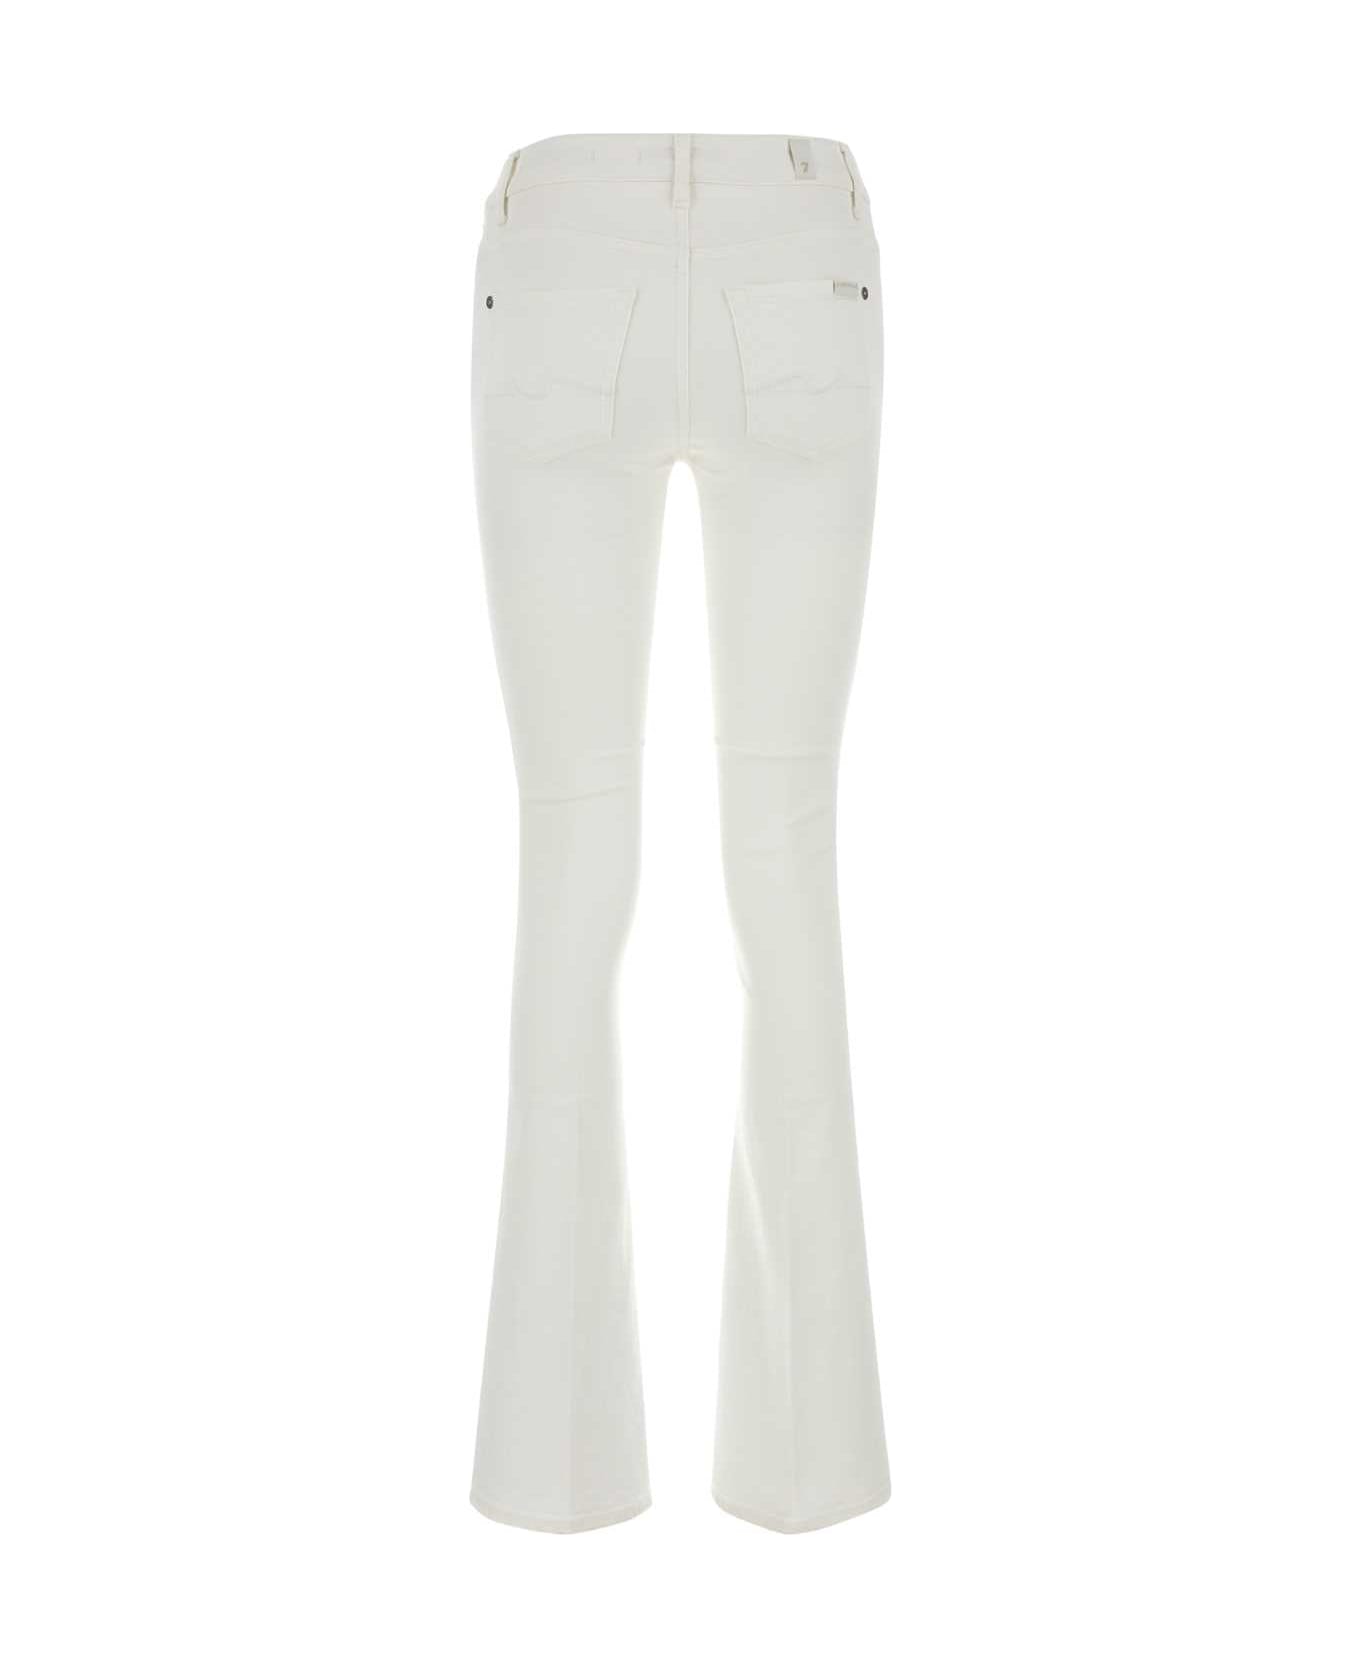 7 For All Mankind White Stretch Denim Bootcut Jeans - WHITE